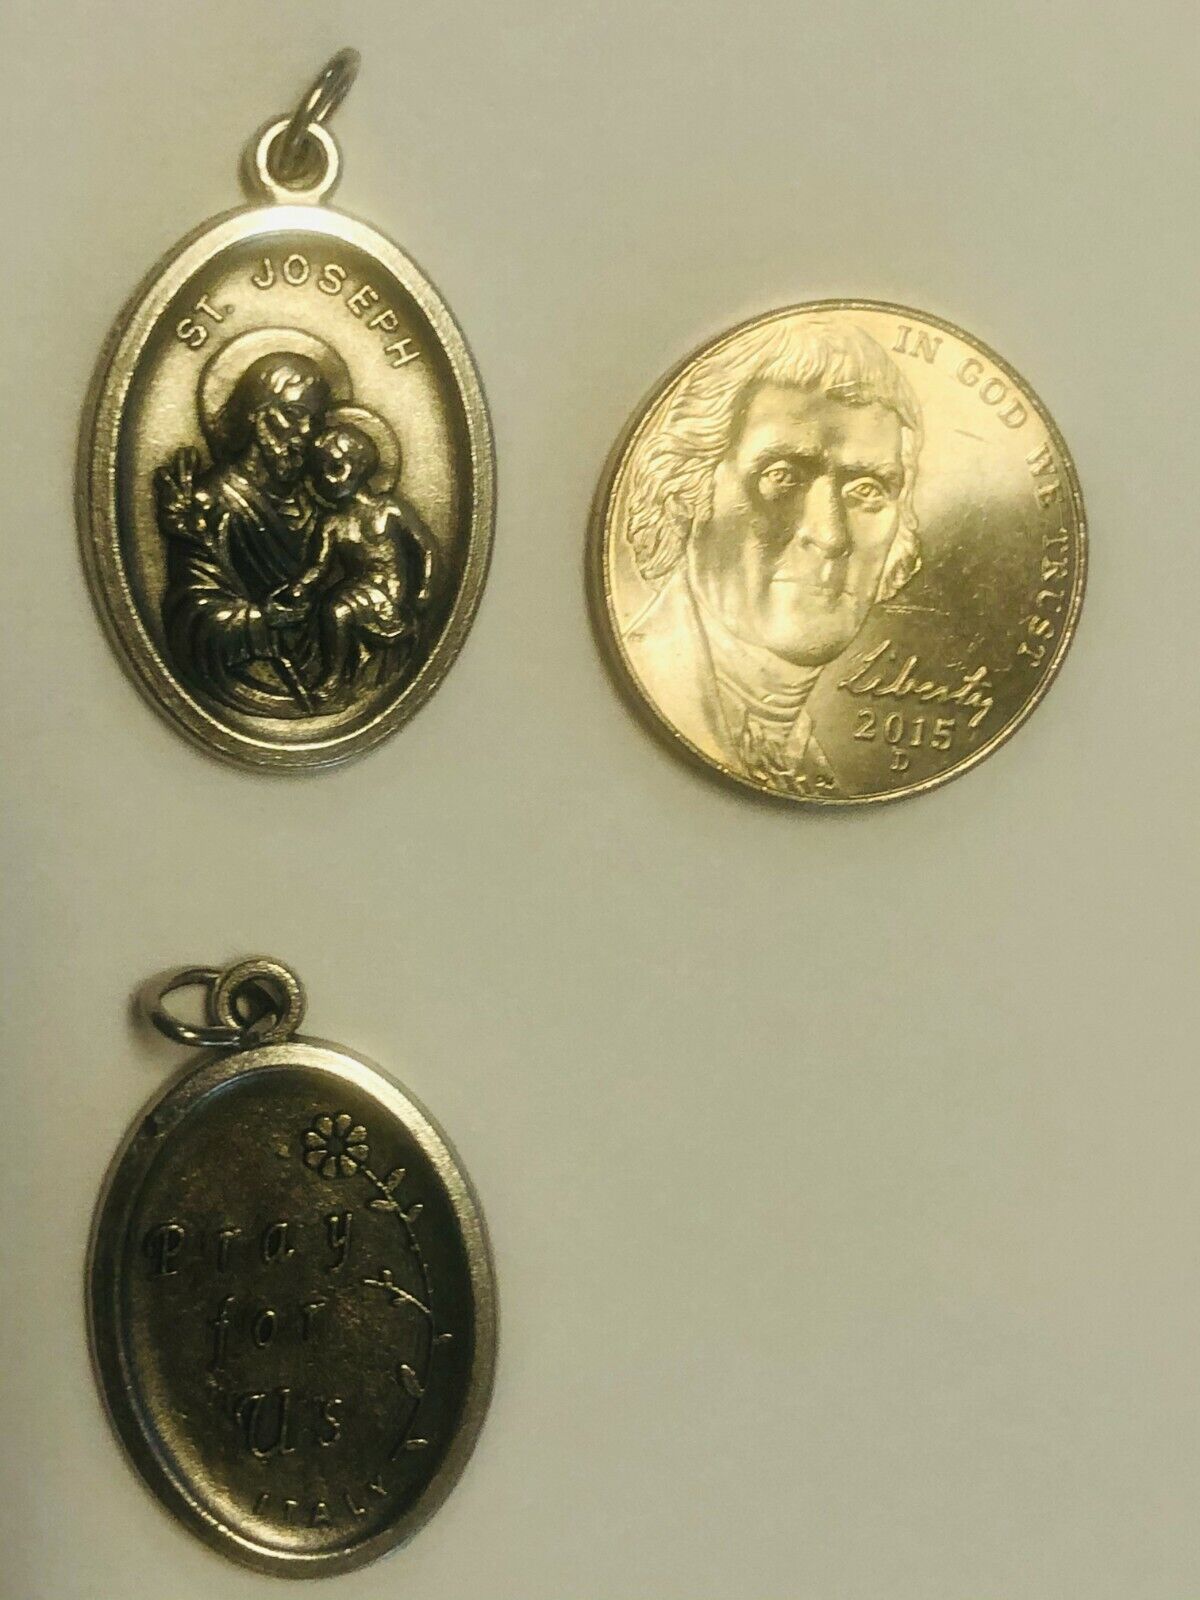 Saint Joseph with Child Jesus Medal, New from Italy - Bob and Penny Lord